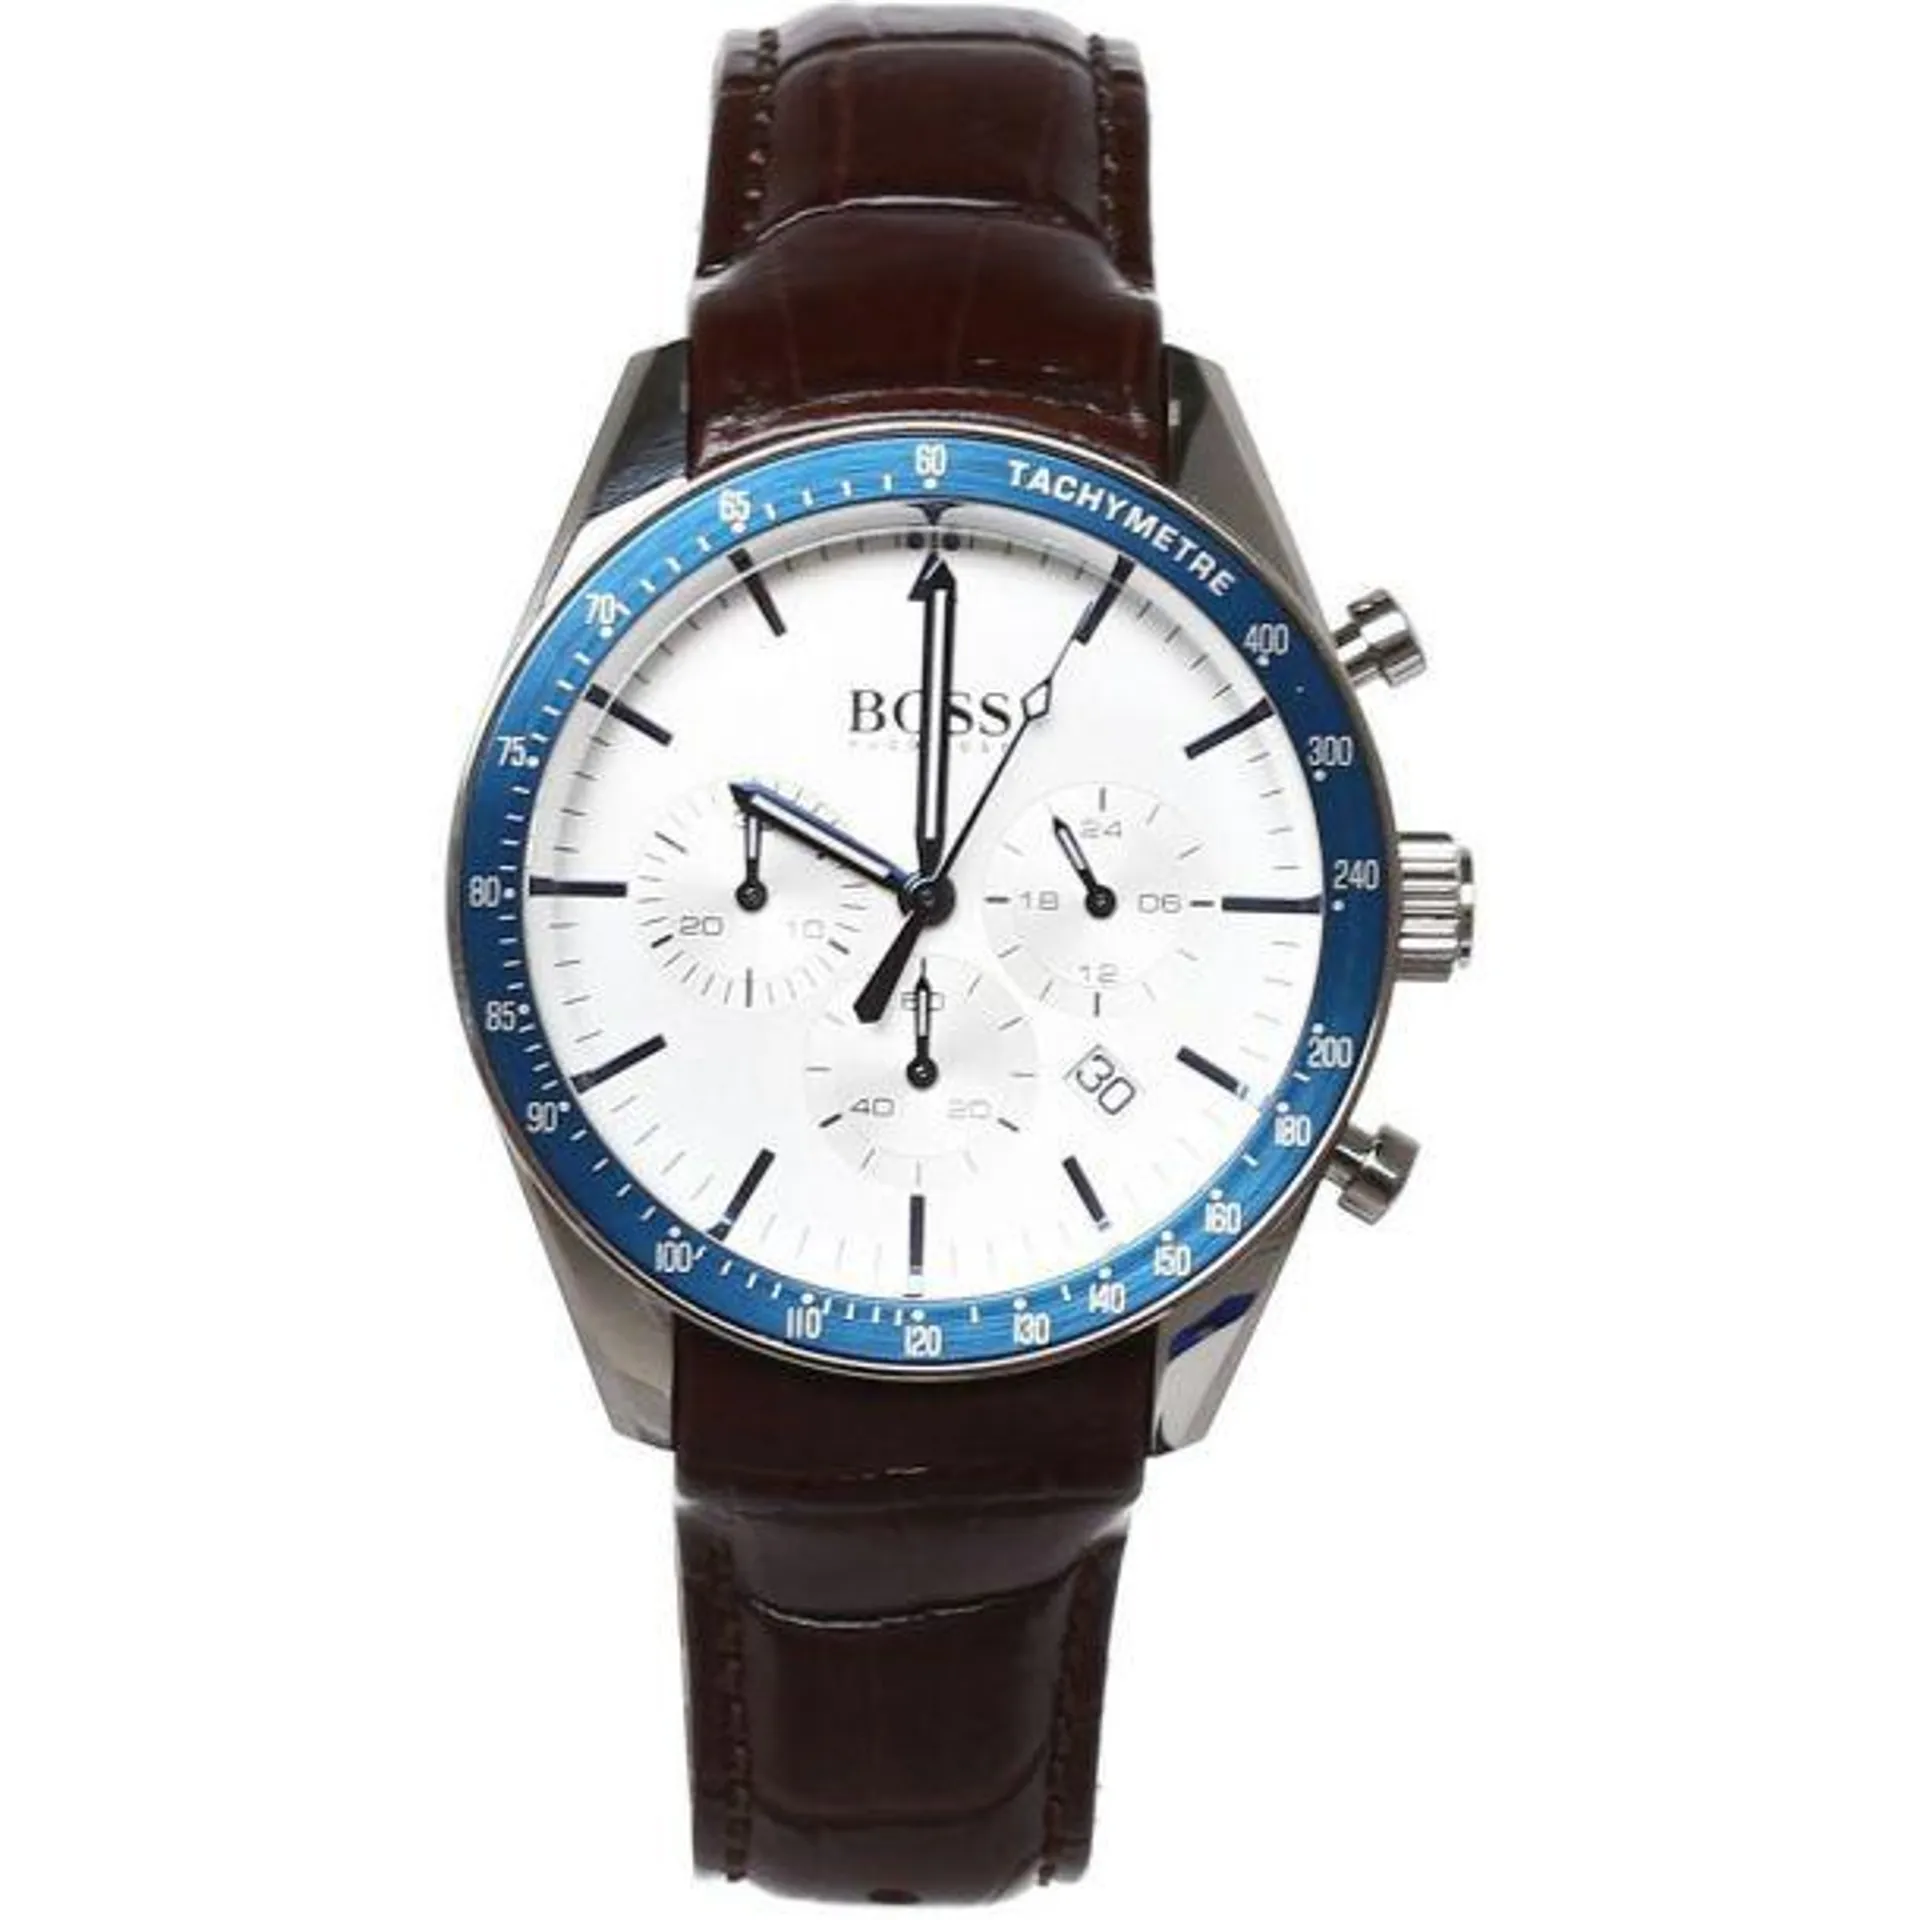 Hugo Boss Men's Trophy White Dial Leather Strap Watch - Brown